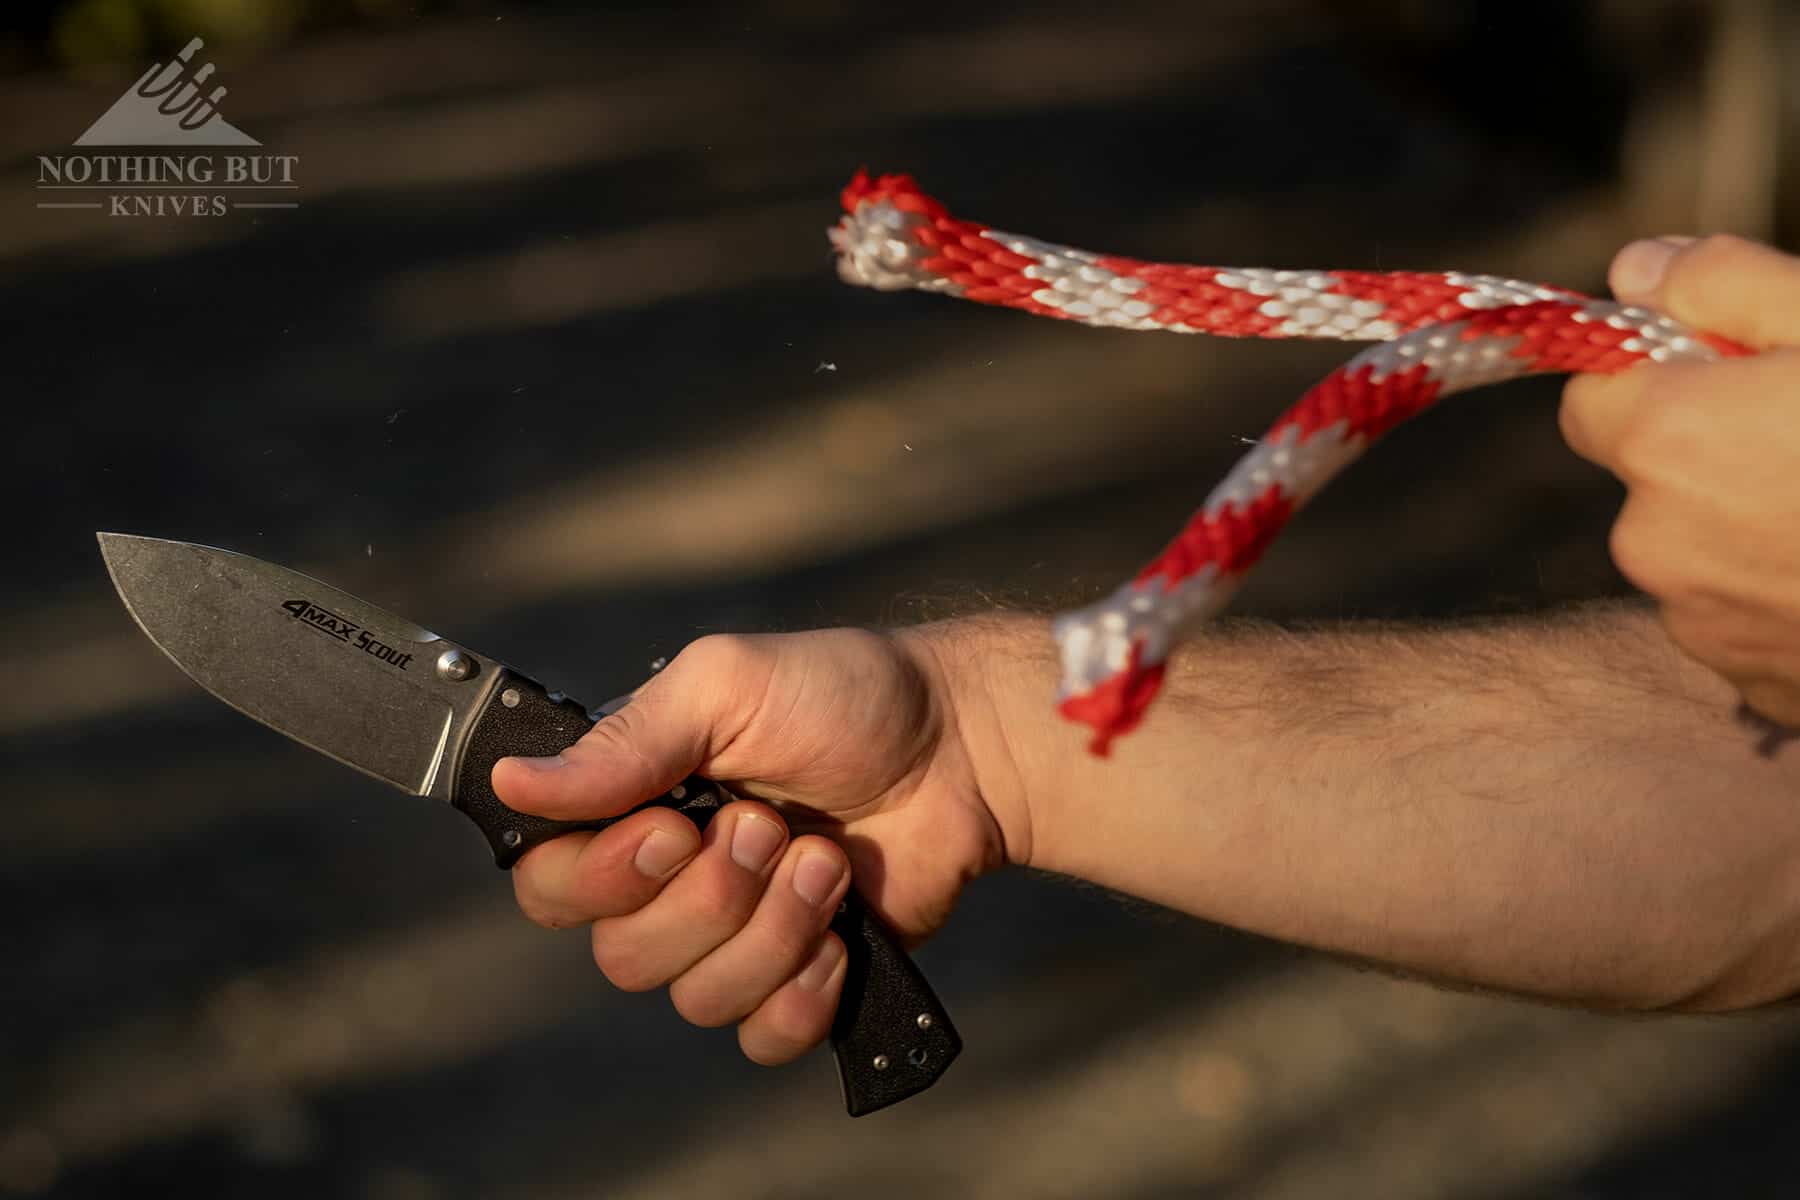 This knife cuts through rope easily and holds it's edge well. 